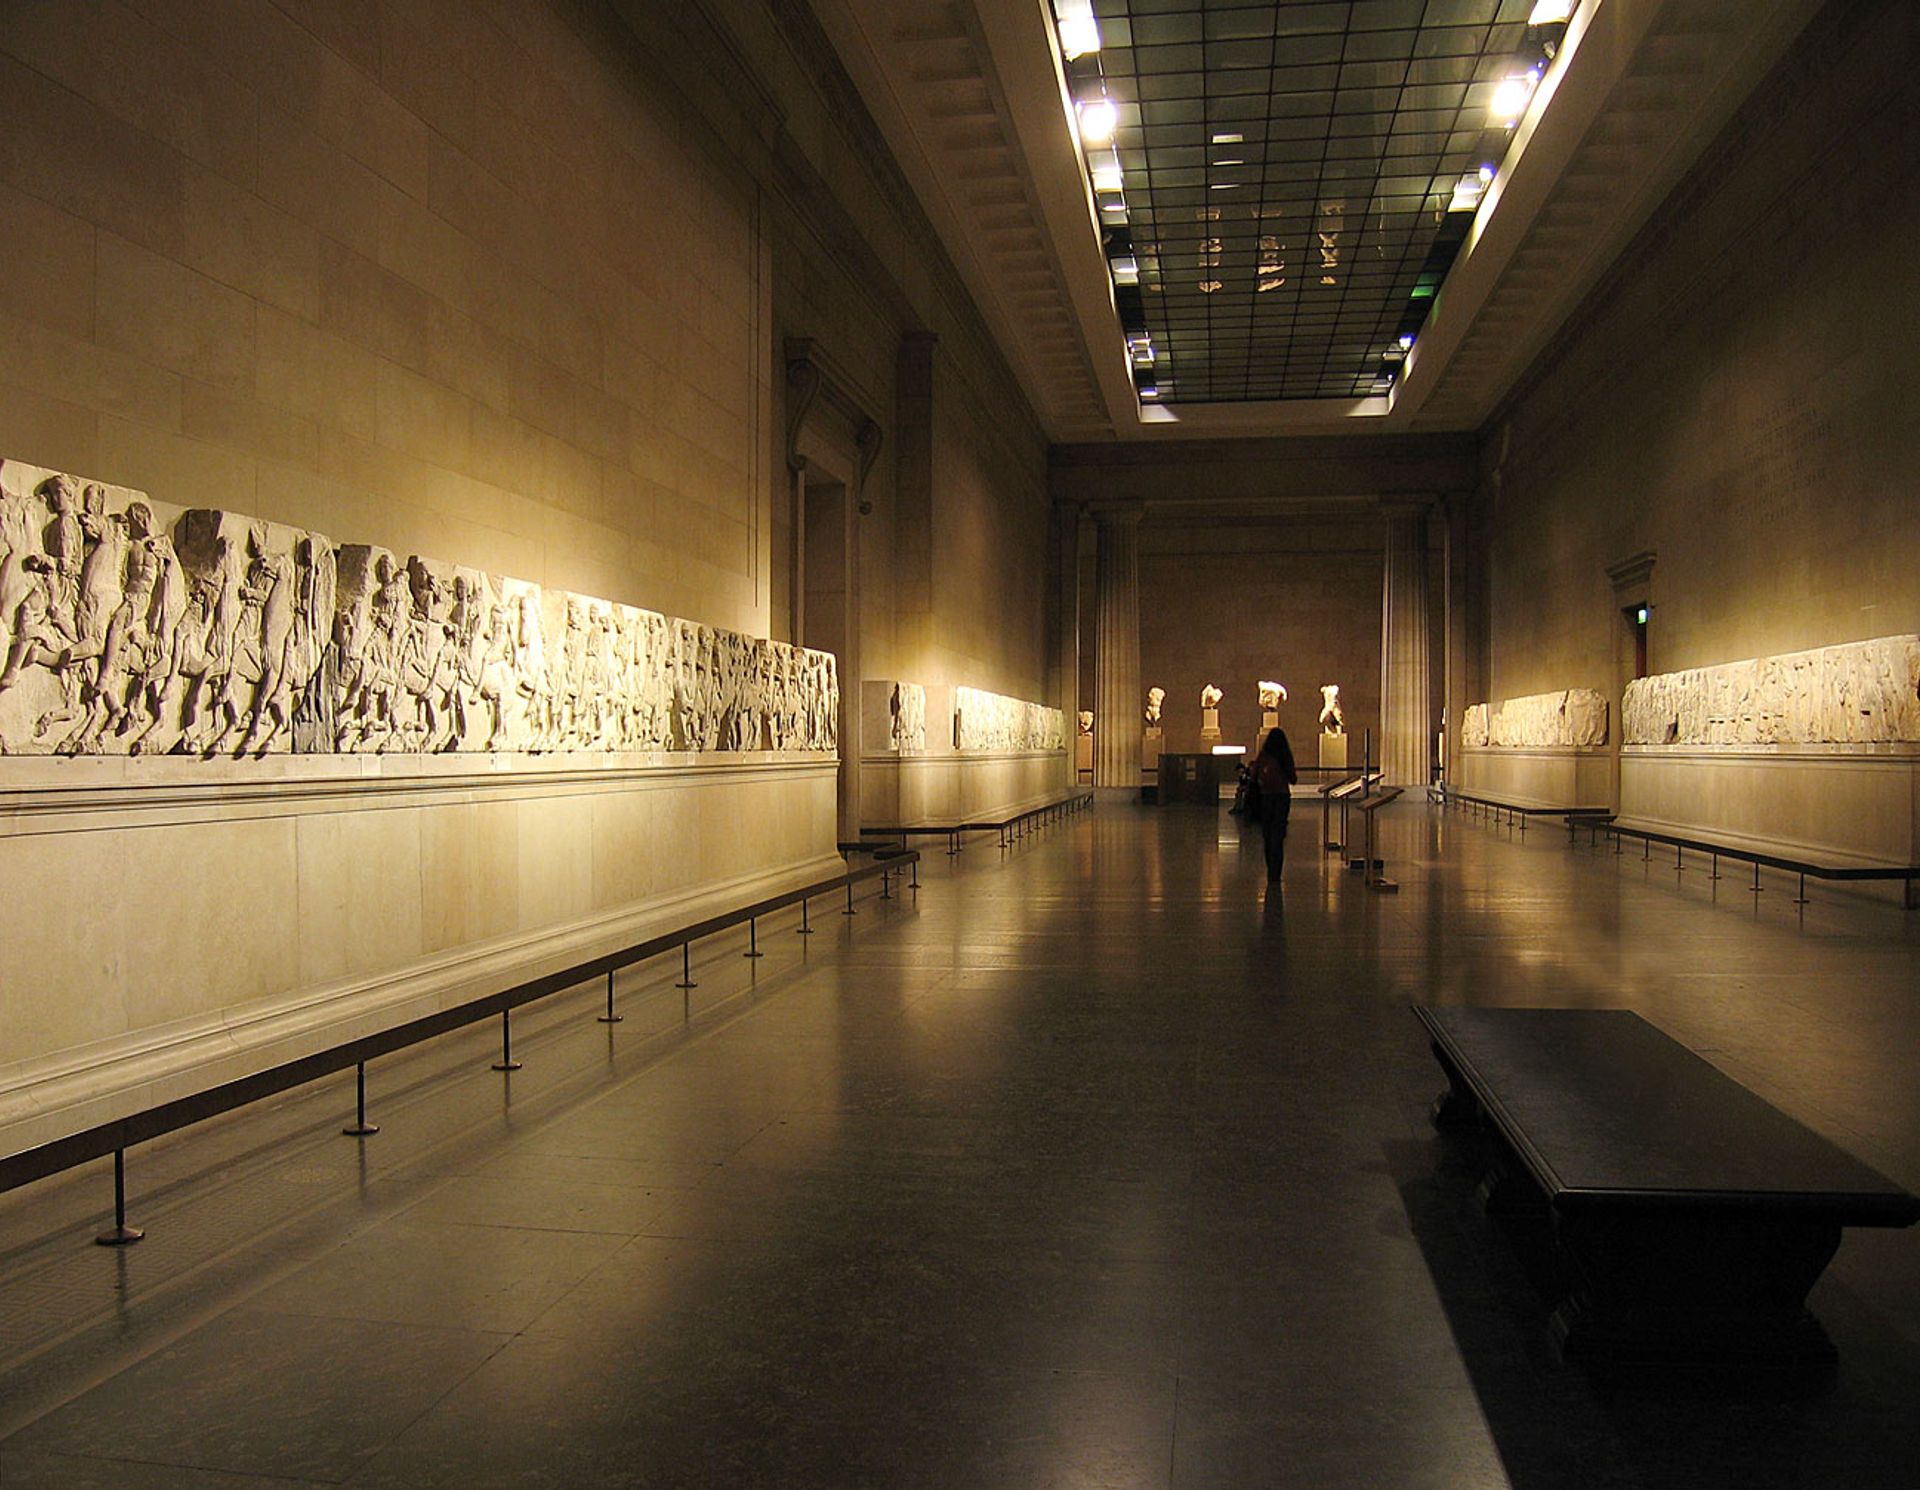 The room containing the Parthenon Marbles in the British Museum

© Andrew Dunn